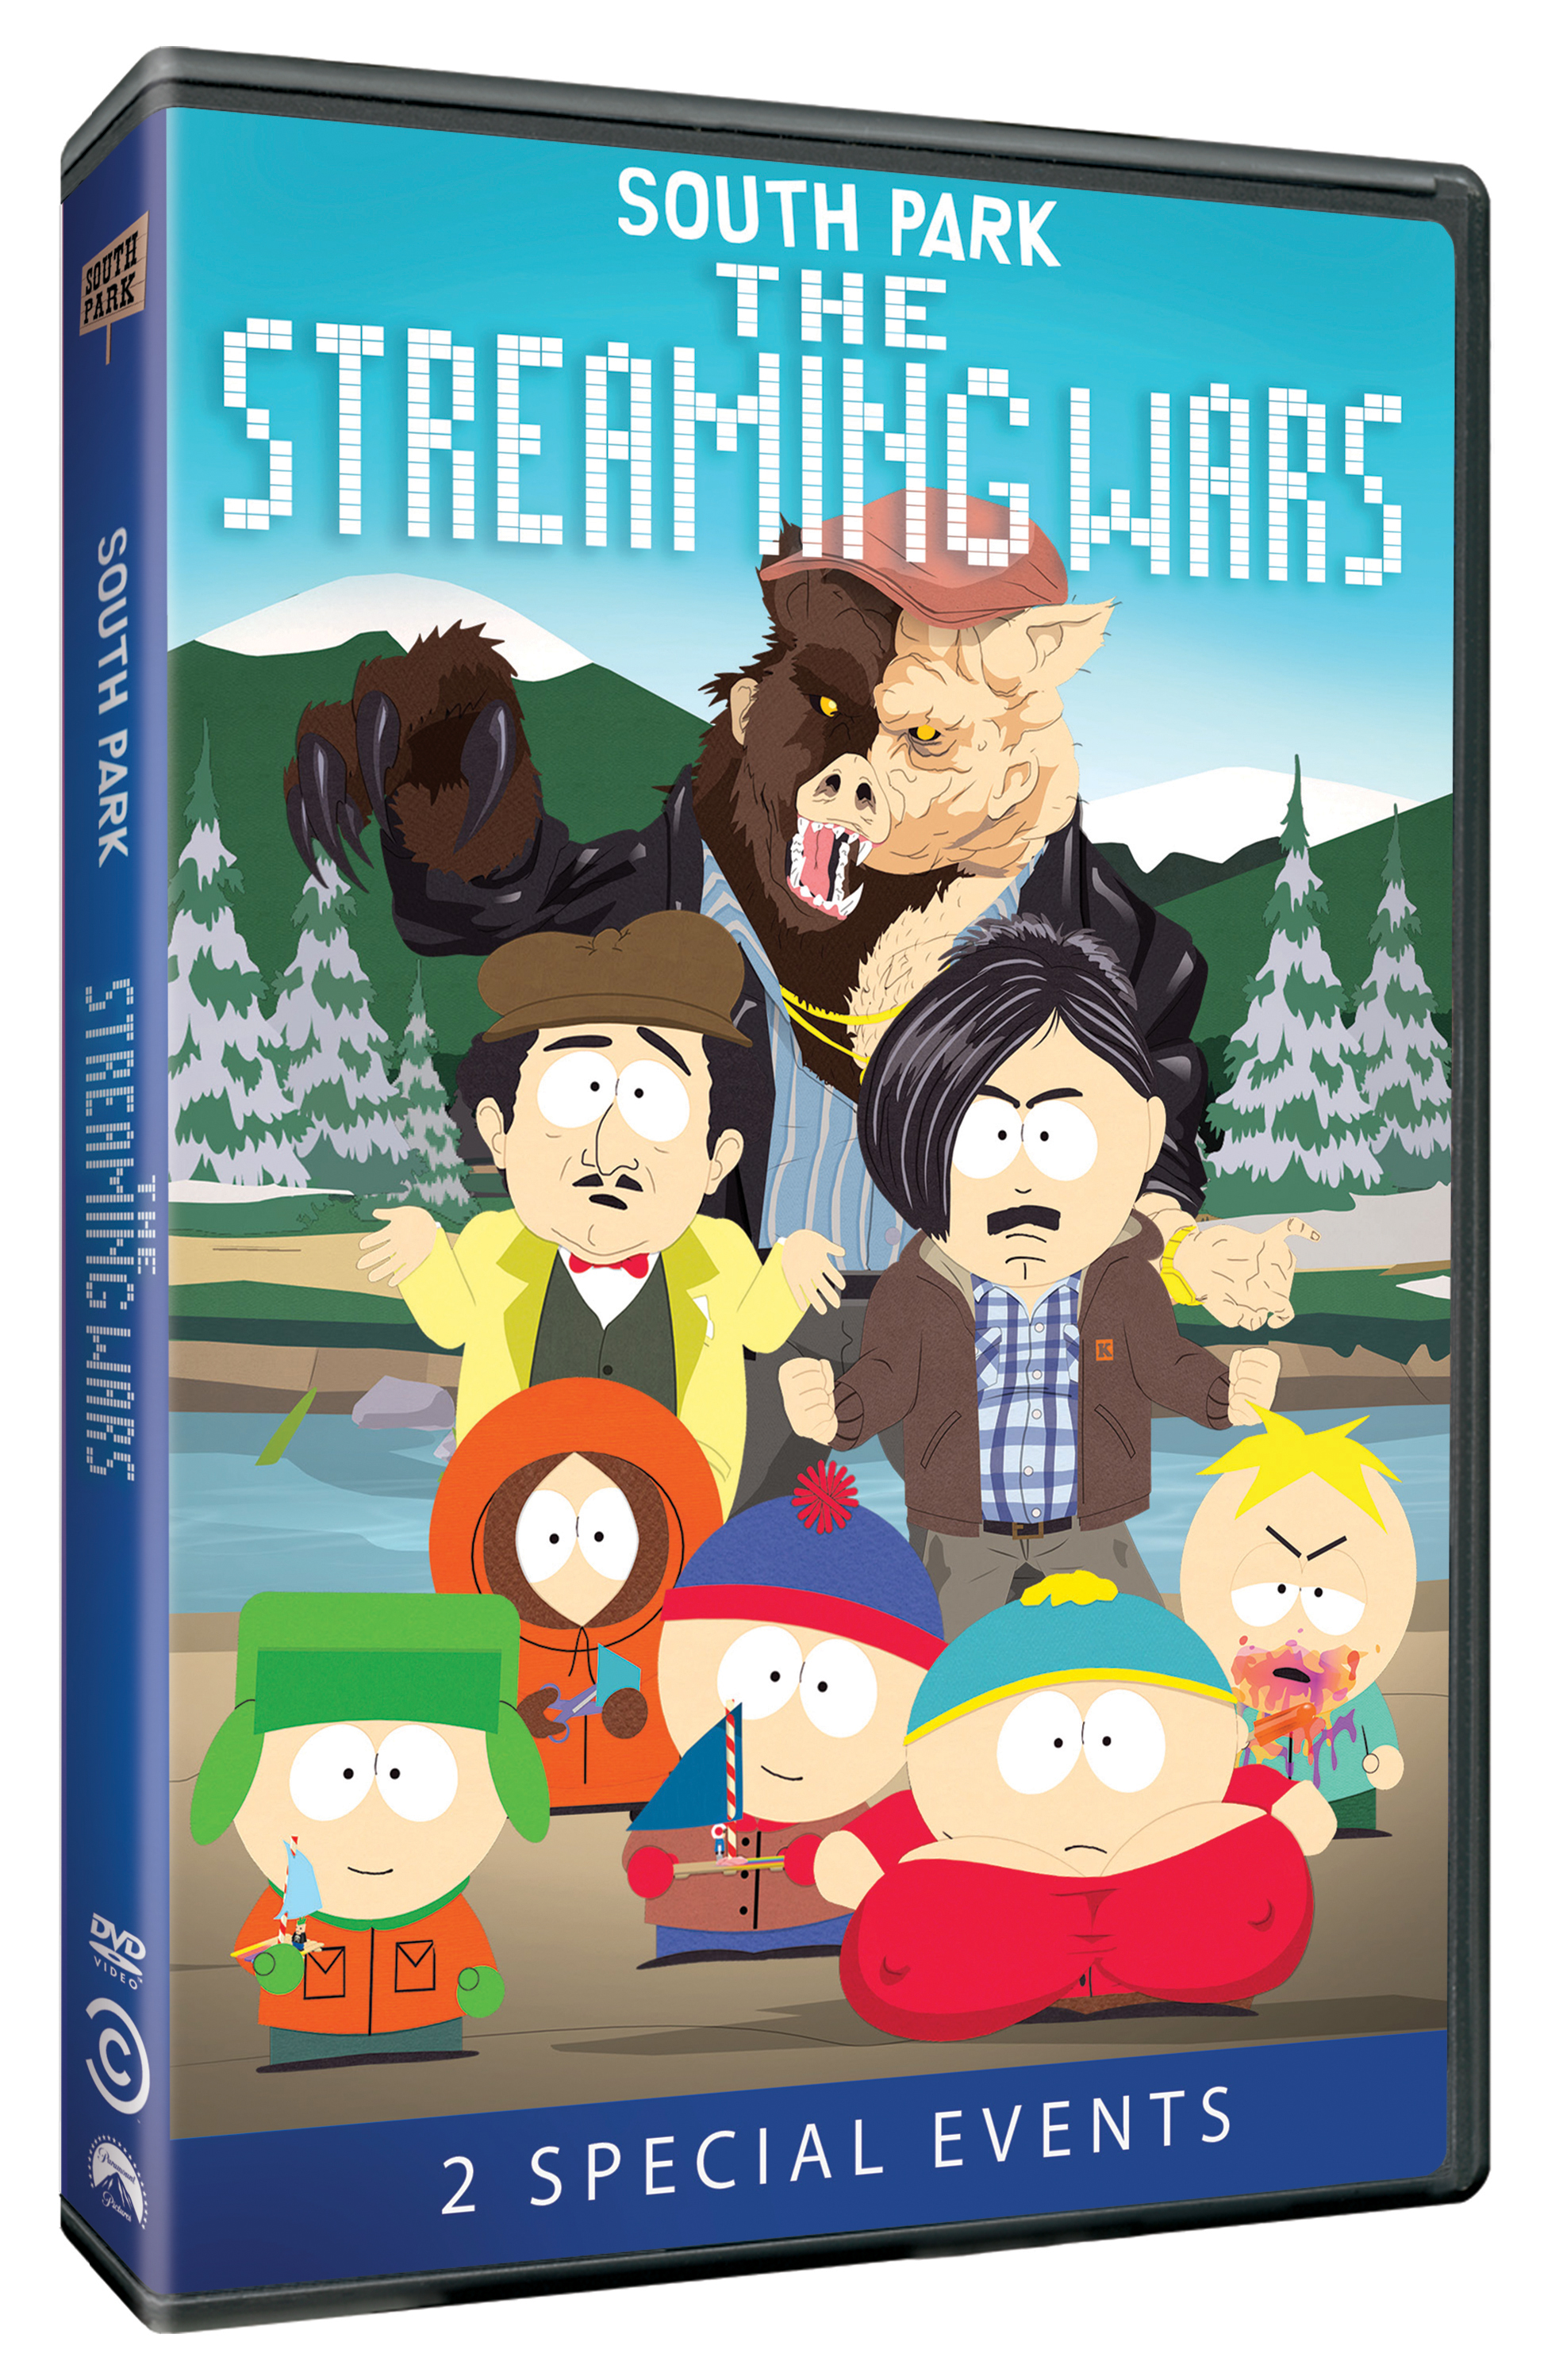 Previously on SOUTH PARK THE STREAMING WARS 